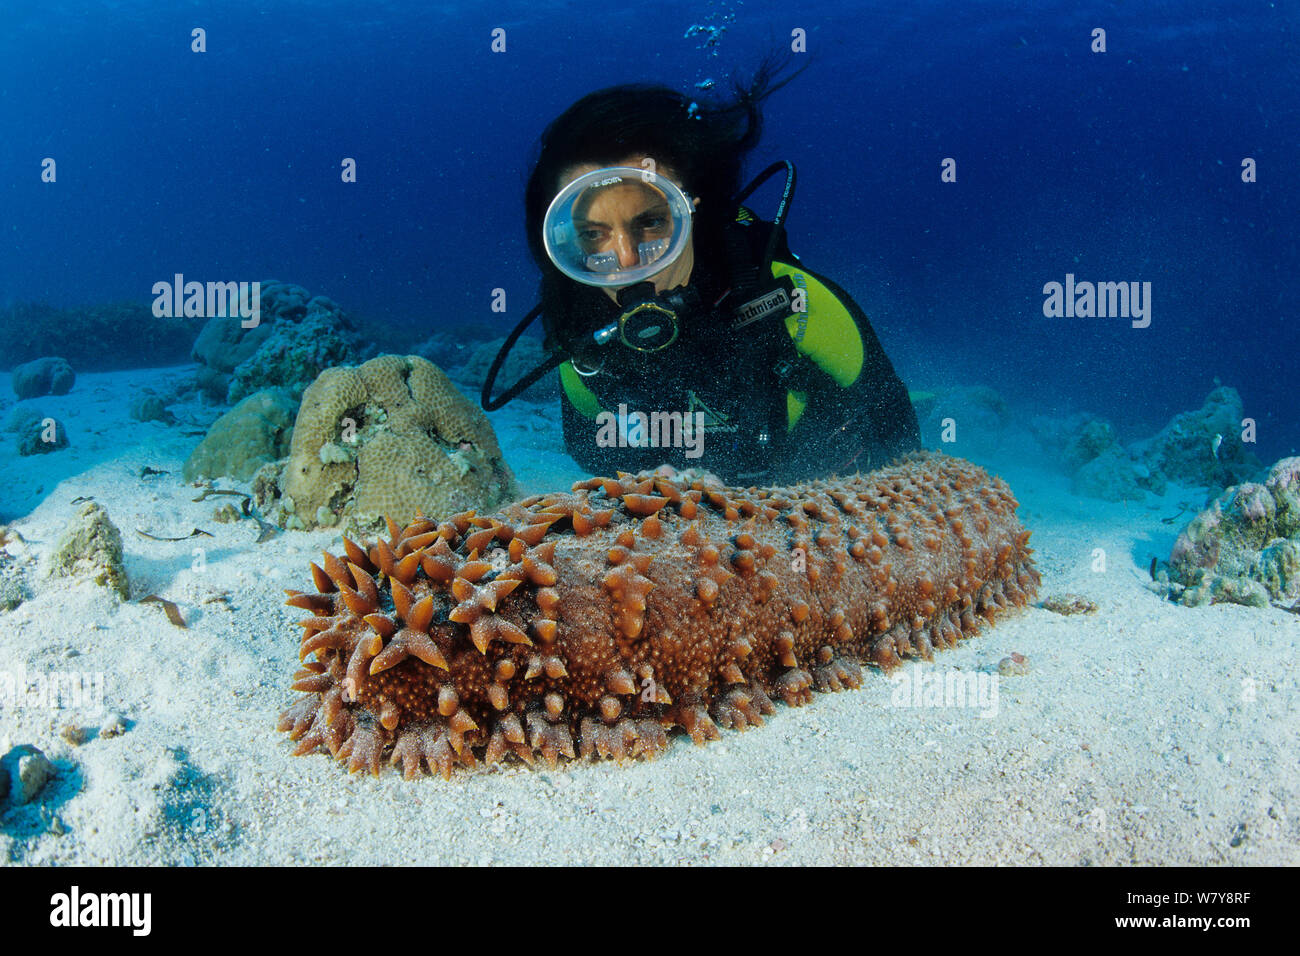 Scuba diver and sea cucumber (Thelenota ananas), Aldabra Atoll, Natural World Heritage Site, Seychelles, Indian Ocean. Stock Photo